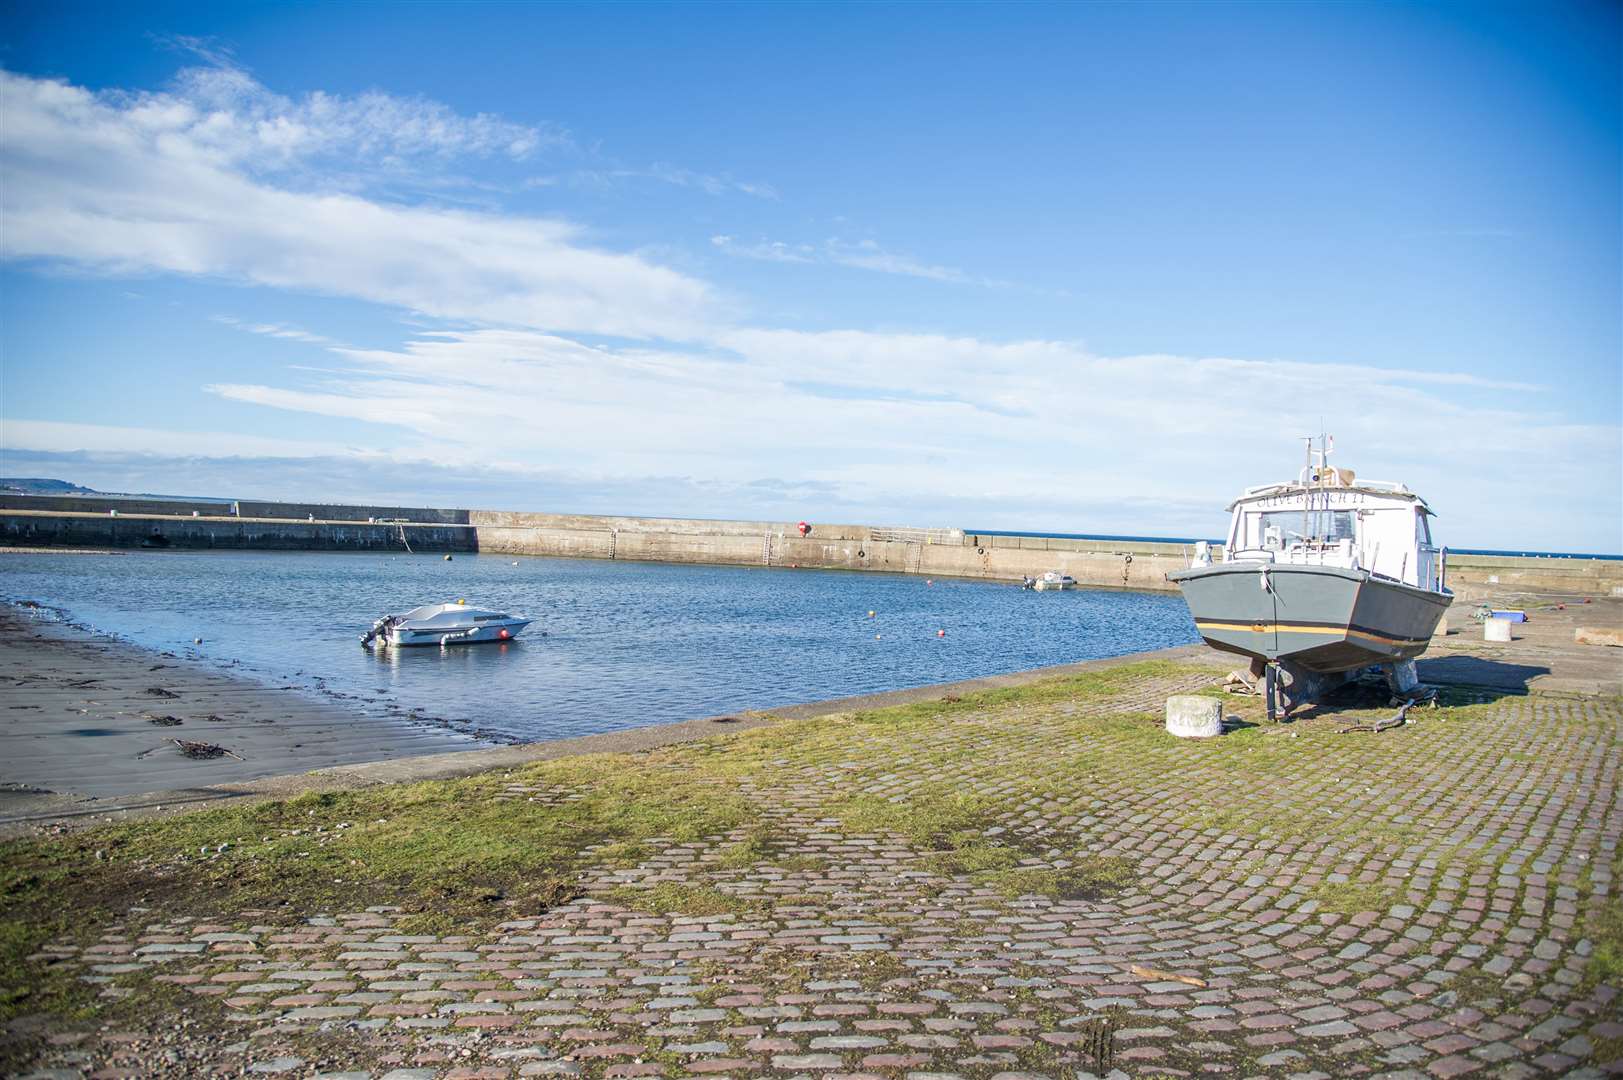 The progress being made to take Portgordon Harbour into community ownership will be outlined at the open day.